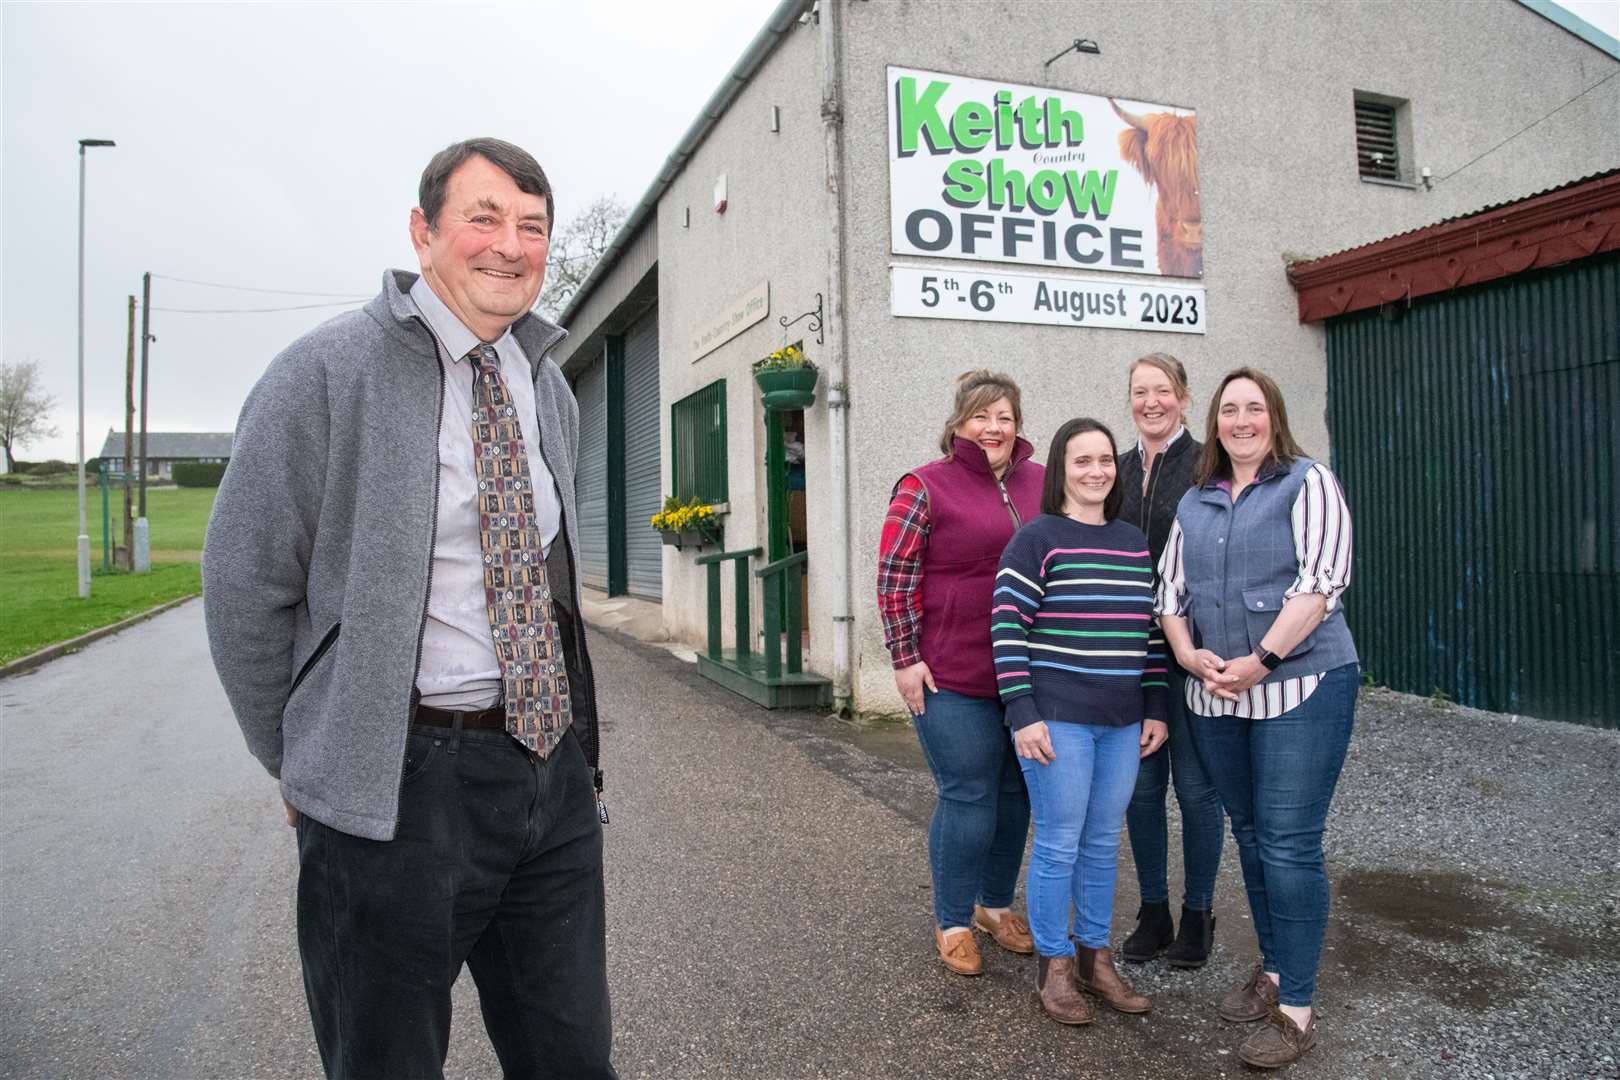 Keith Show's new chairman Ewan Stewart with organisers Carly Mackay, Shirley Mitchell, Lorna Edwards and Sally Smith. Picture: Daniel Forsyth.